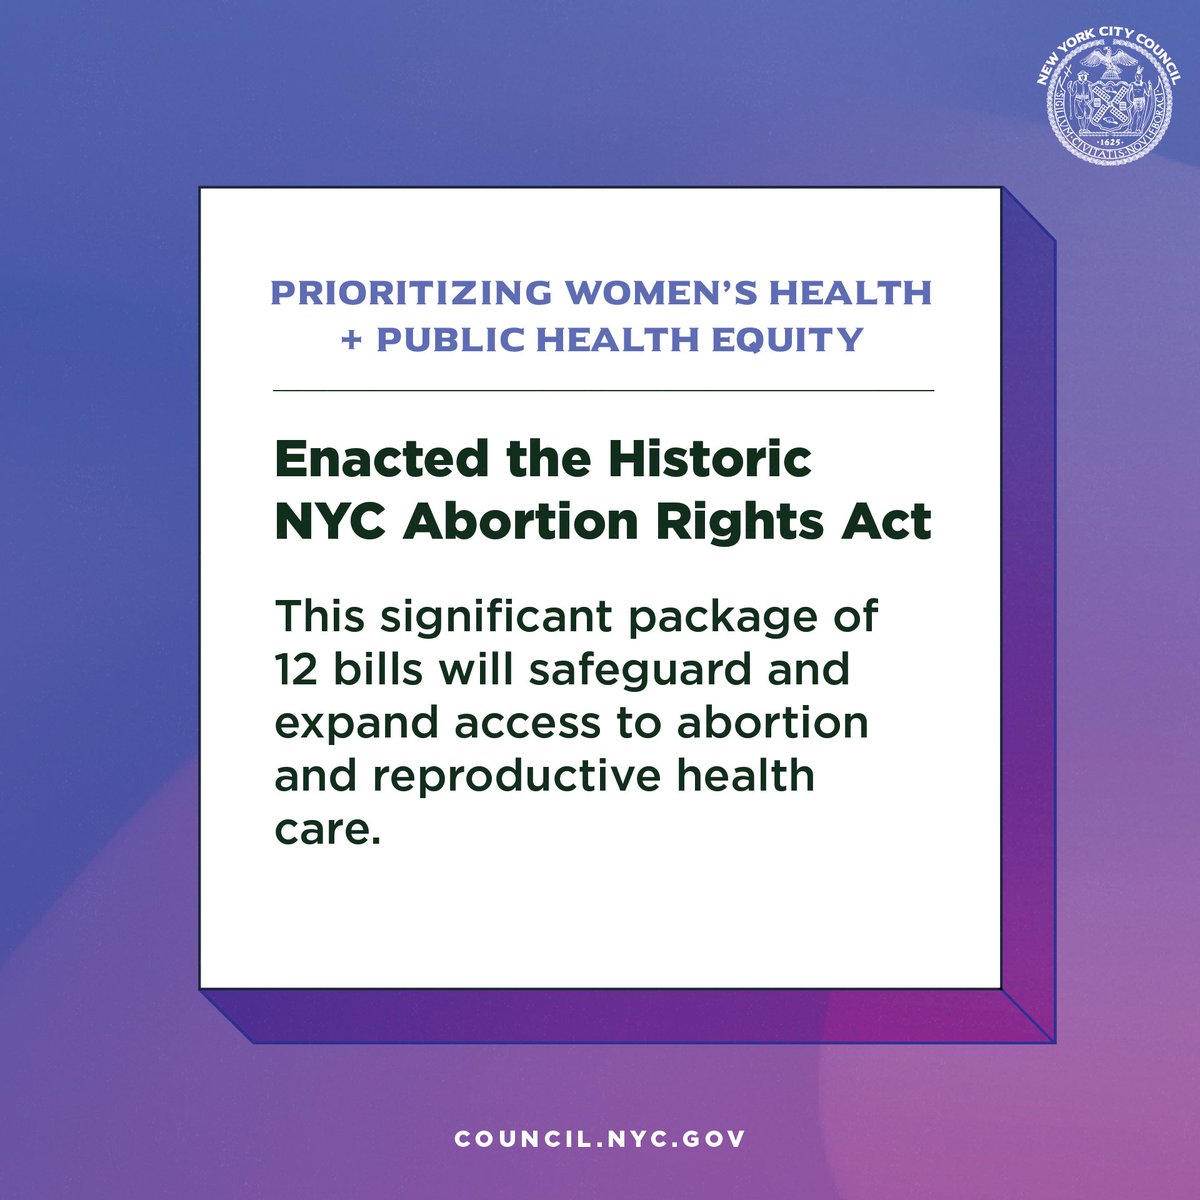 To protect reproductive healthcare and safeguard access to abortion for New Yorkers following SCOTUS’ decision to overturn Roe v. Wade, the Council acted swiftly to pass the ‘NYC Abortion Rights Act’. Read More: council.nyc.gov/press/2022/08/…